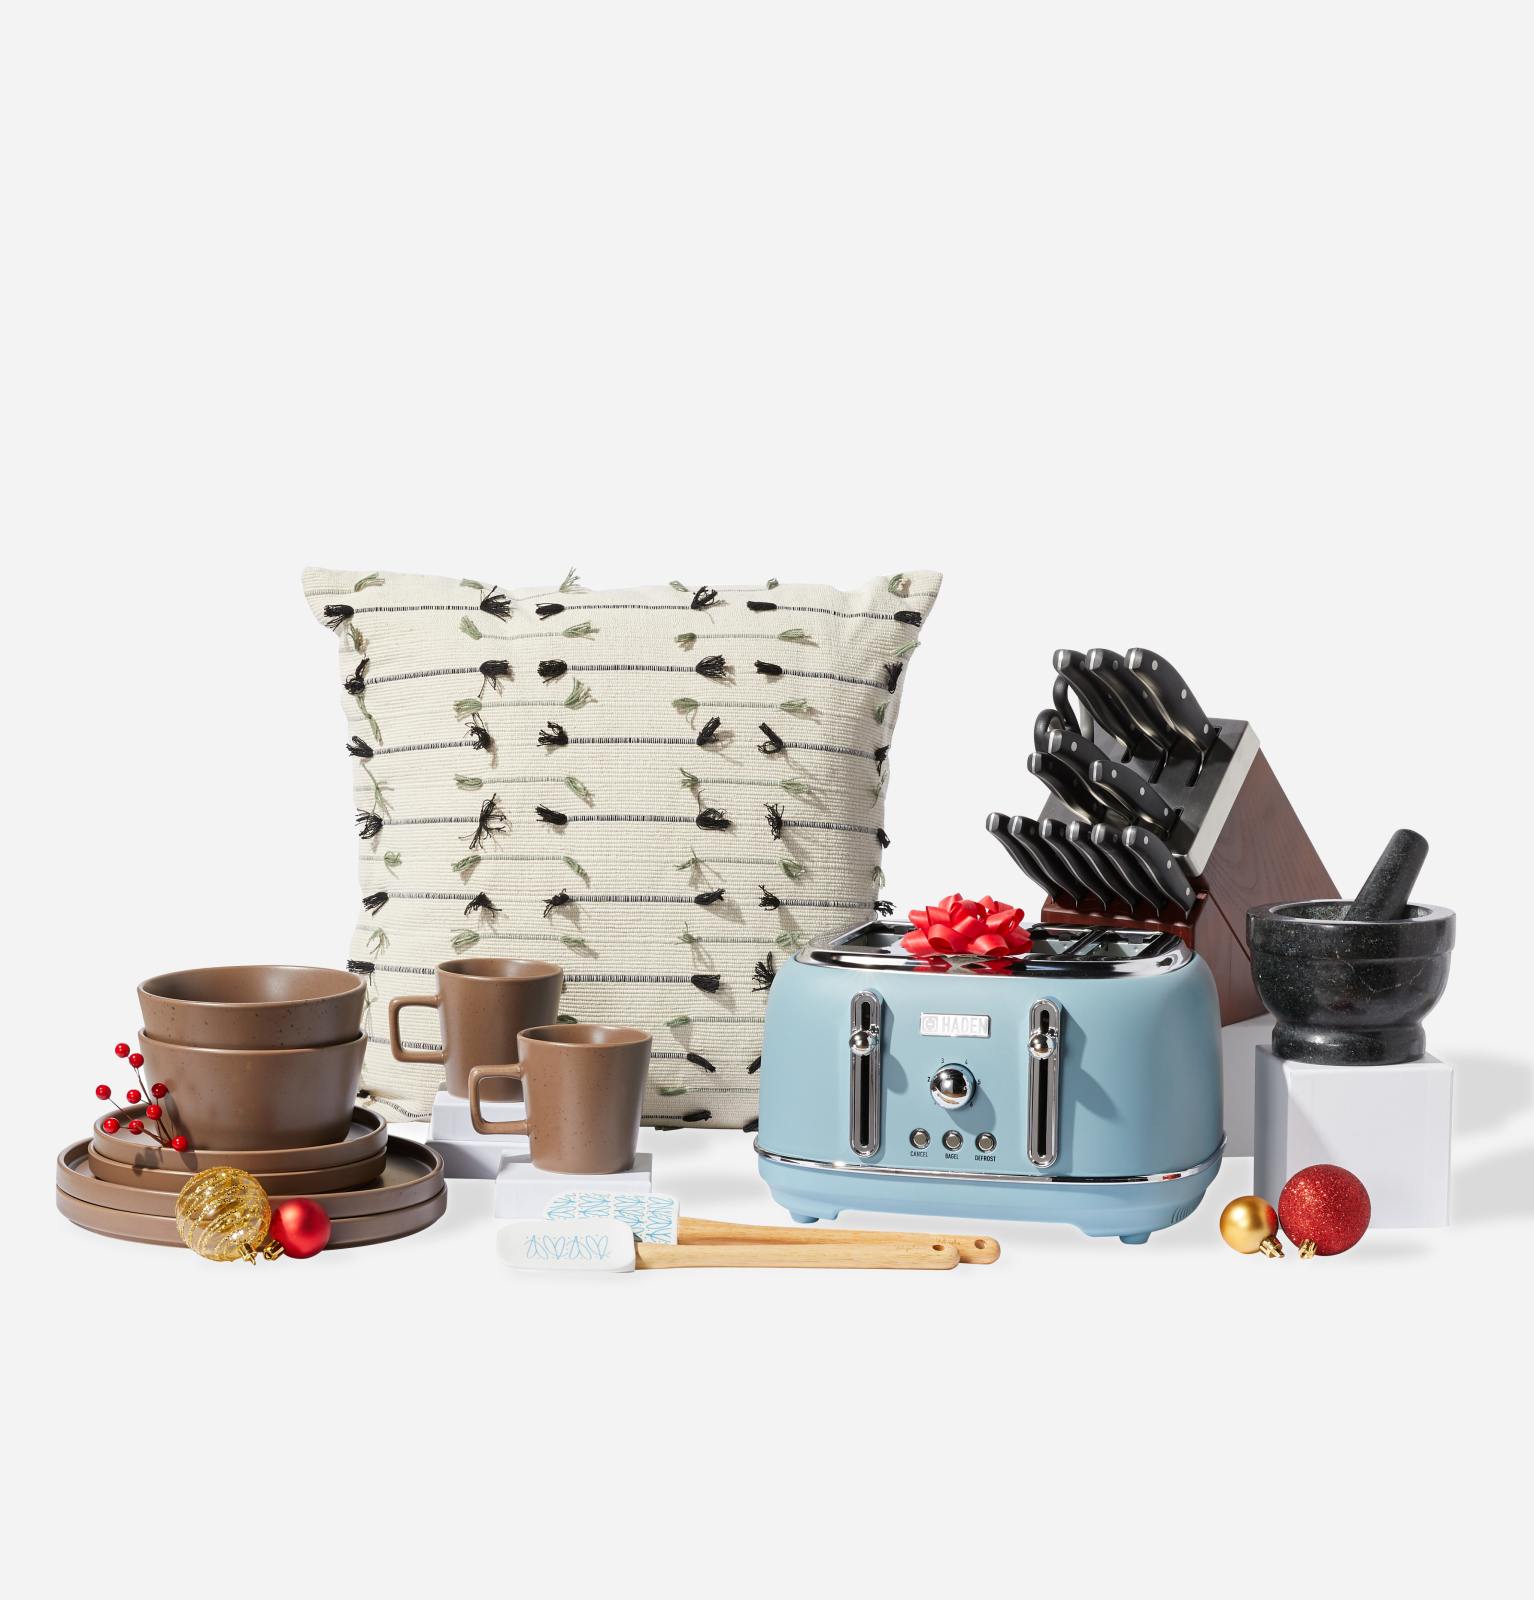 dishware, a throw pillow, a toaster, and other home focused gift options available online at overstock